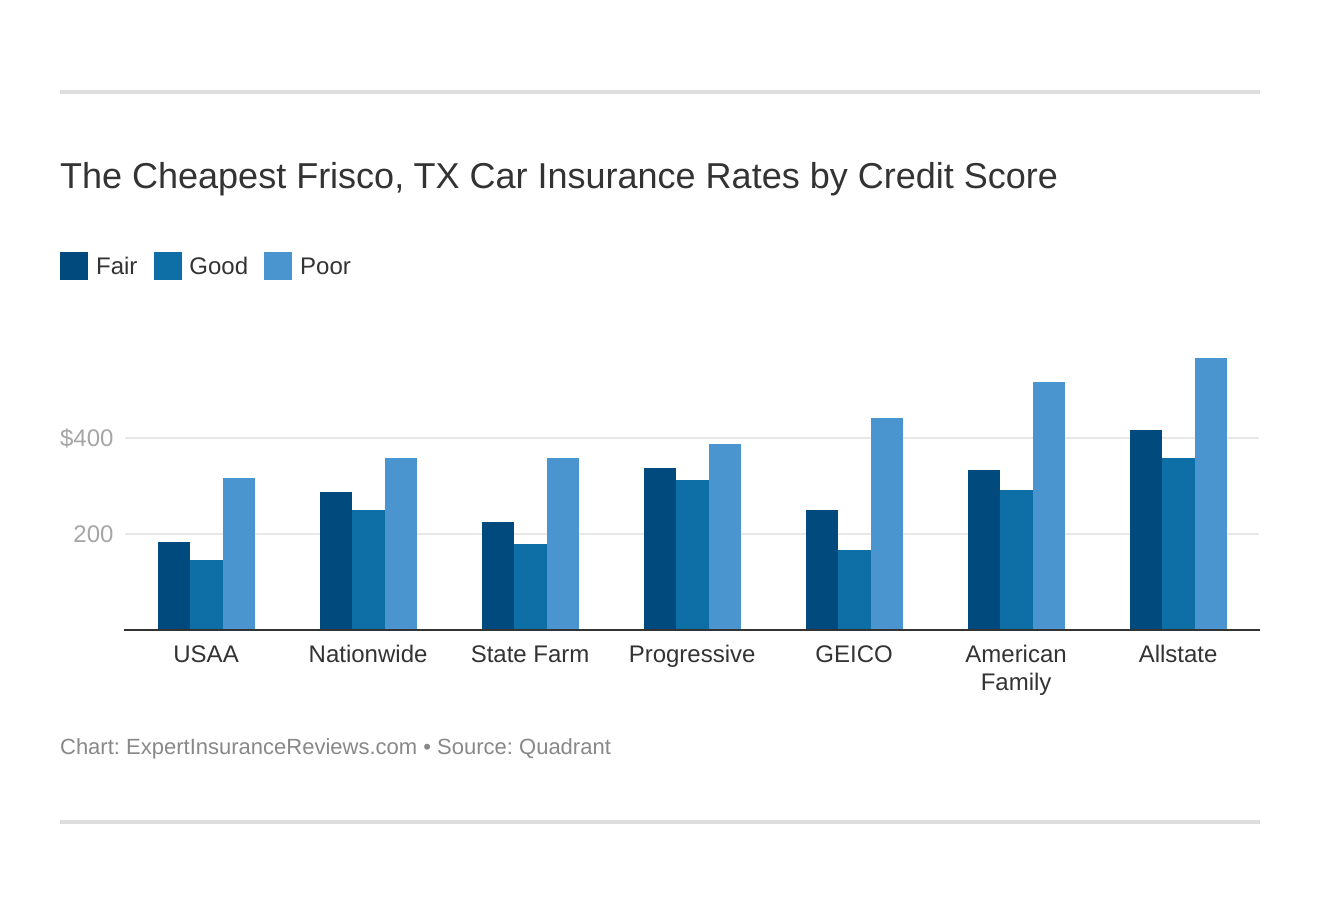 The Cheapest Frisco, TX Car Insurance Rates by Credit Score